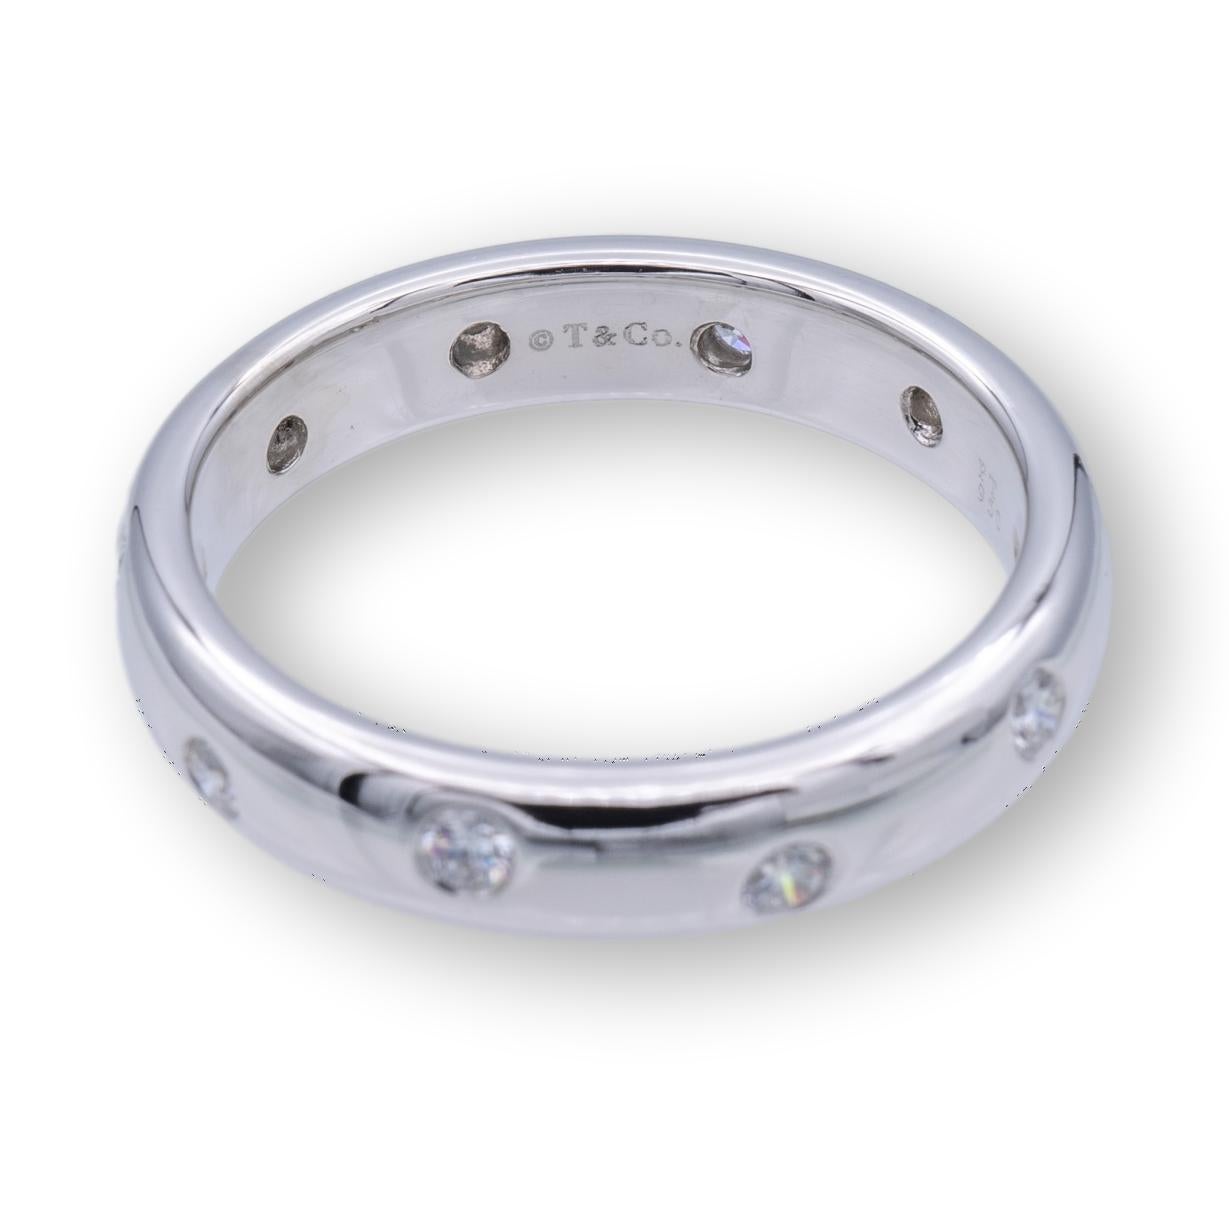 Tiffany & Co. Etoile Domed Band Ring finely crafted in Platinum measuring 3mm wide with 10 round brilliant cut diamonds set in platinum bezels weighing 0.22 carats total weight approximately. The band is domed and comfort fit.

RING